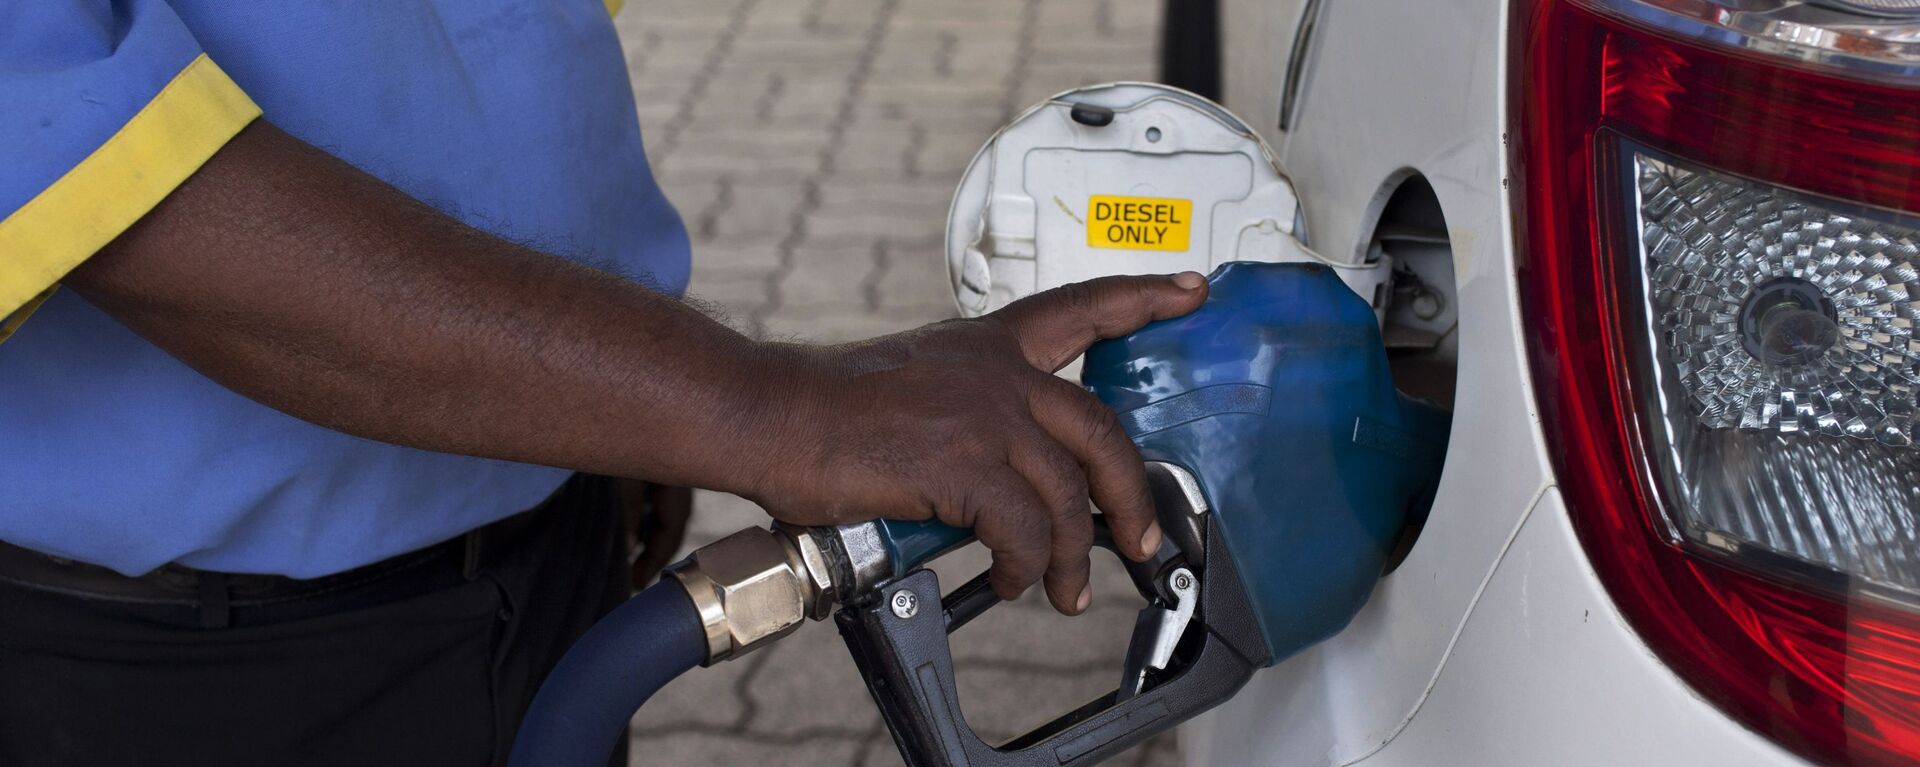 A man fills diesel in a car at a fuel station in New Delhi, India, Sunday, Oct. 19, 2014. India freed diesel prices from government control Sunday while raising natural gas tariffs in the biggest-yet reform by Prime Minister Narendra Modi's government, as it aims to boost the country's economy and overhaul its energy sector.(AP Photo/Tsering Topgyal) - Sputnik International, 1920, 02.03.2021